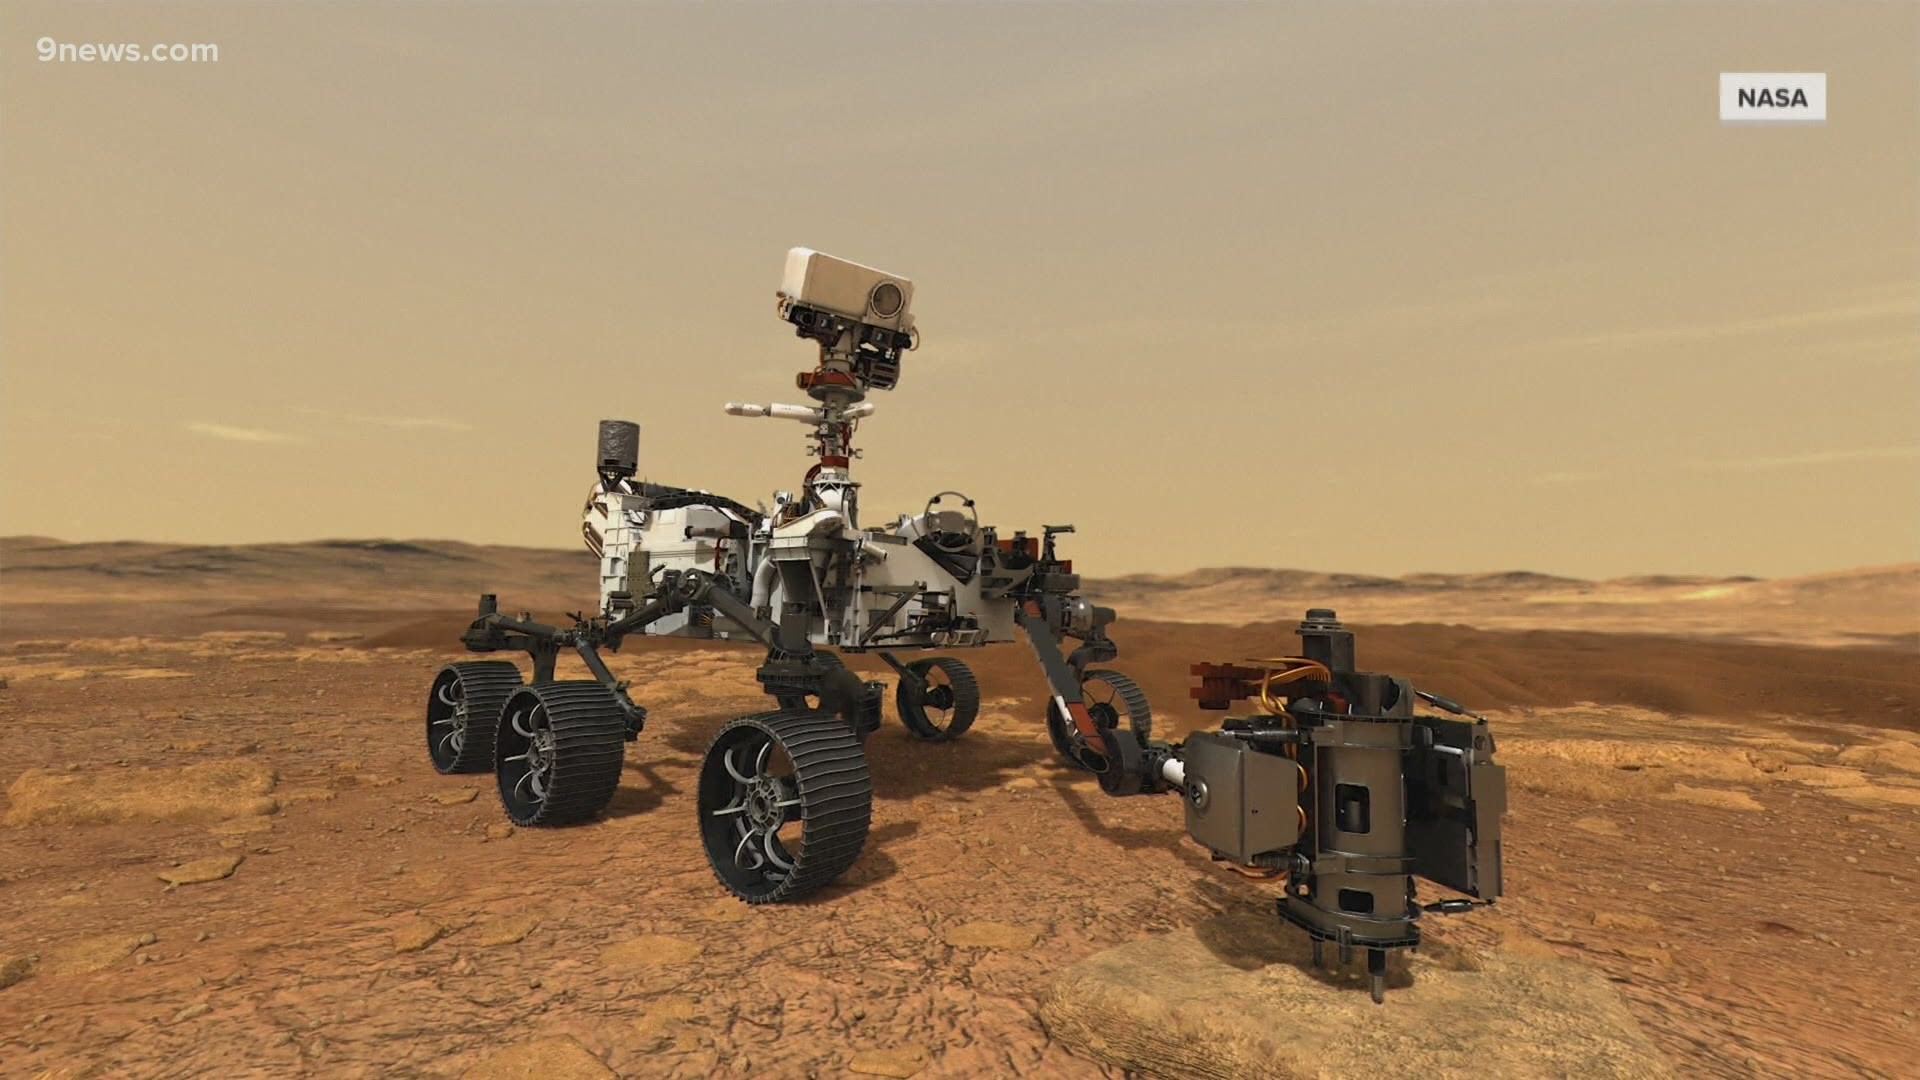 The most sophisticated rover ever sent to Mars is set to land on Thursday, Feb. 18. Here's how NASA plans to pull off the daring landing on the Red Planet.